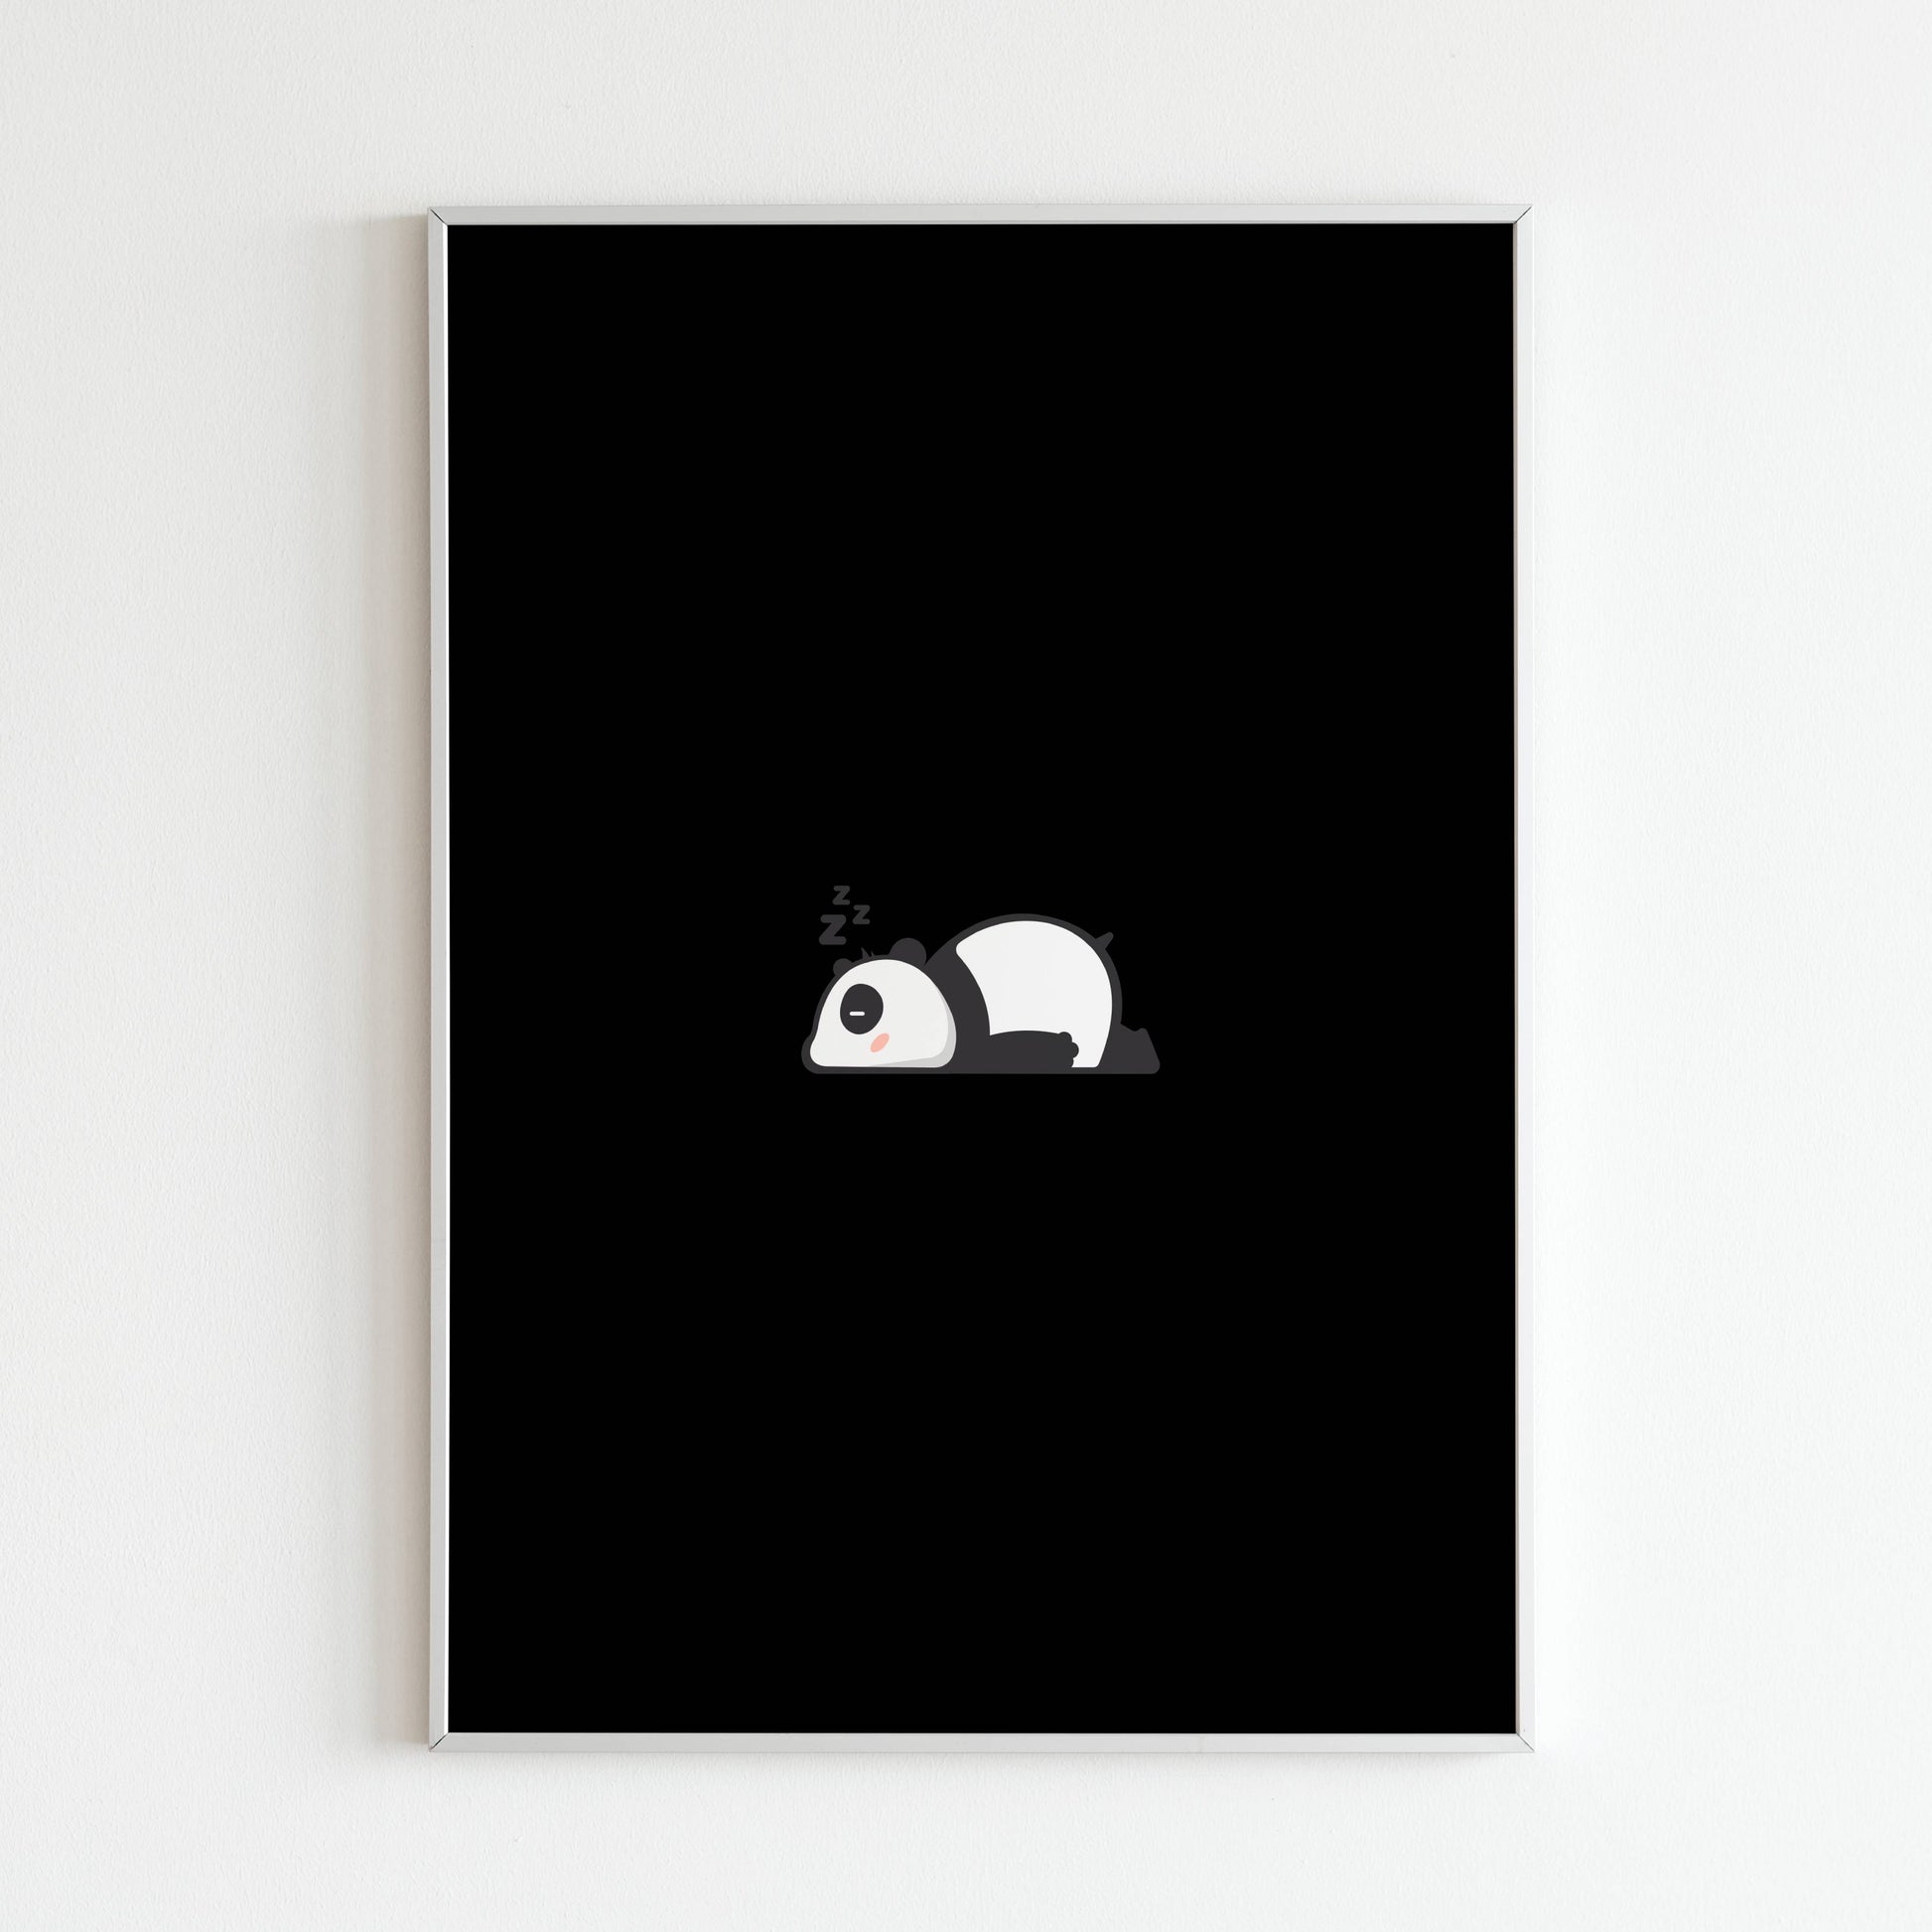 Downloadable "Lazy panda" wall art for a humorous and relatable piece.